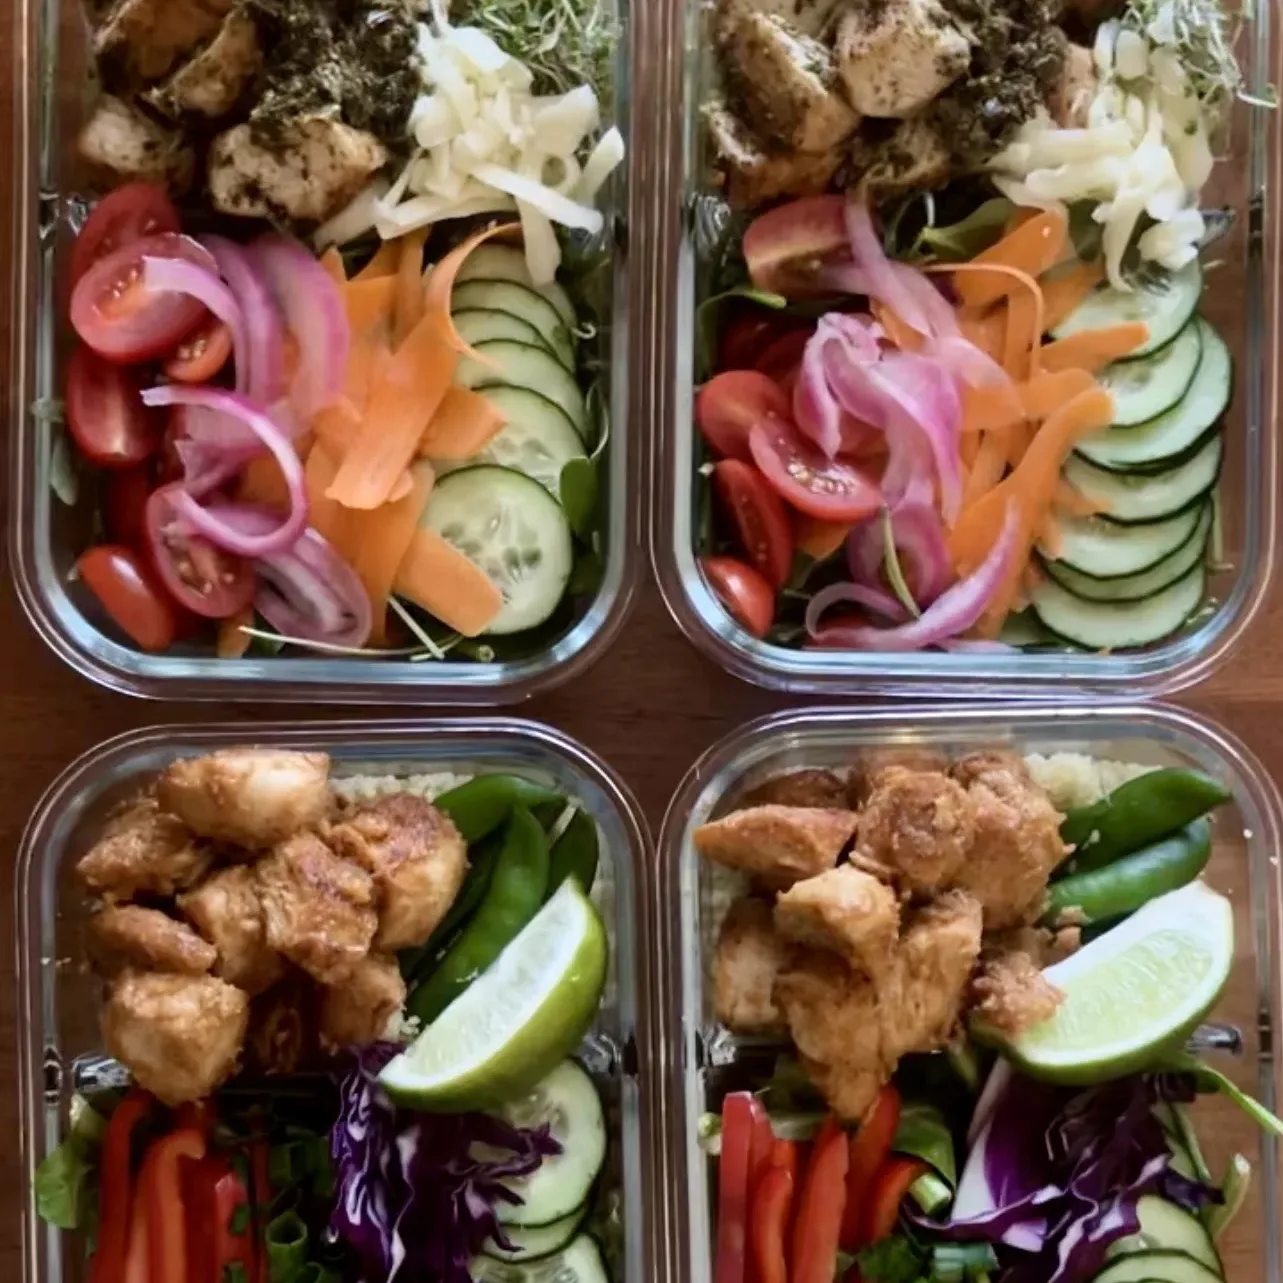 Personal Chef and Meal-Prepping Services